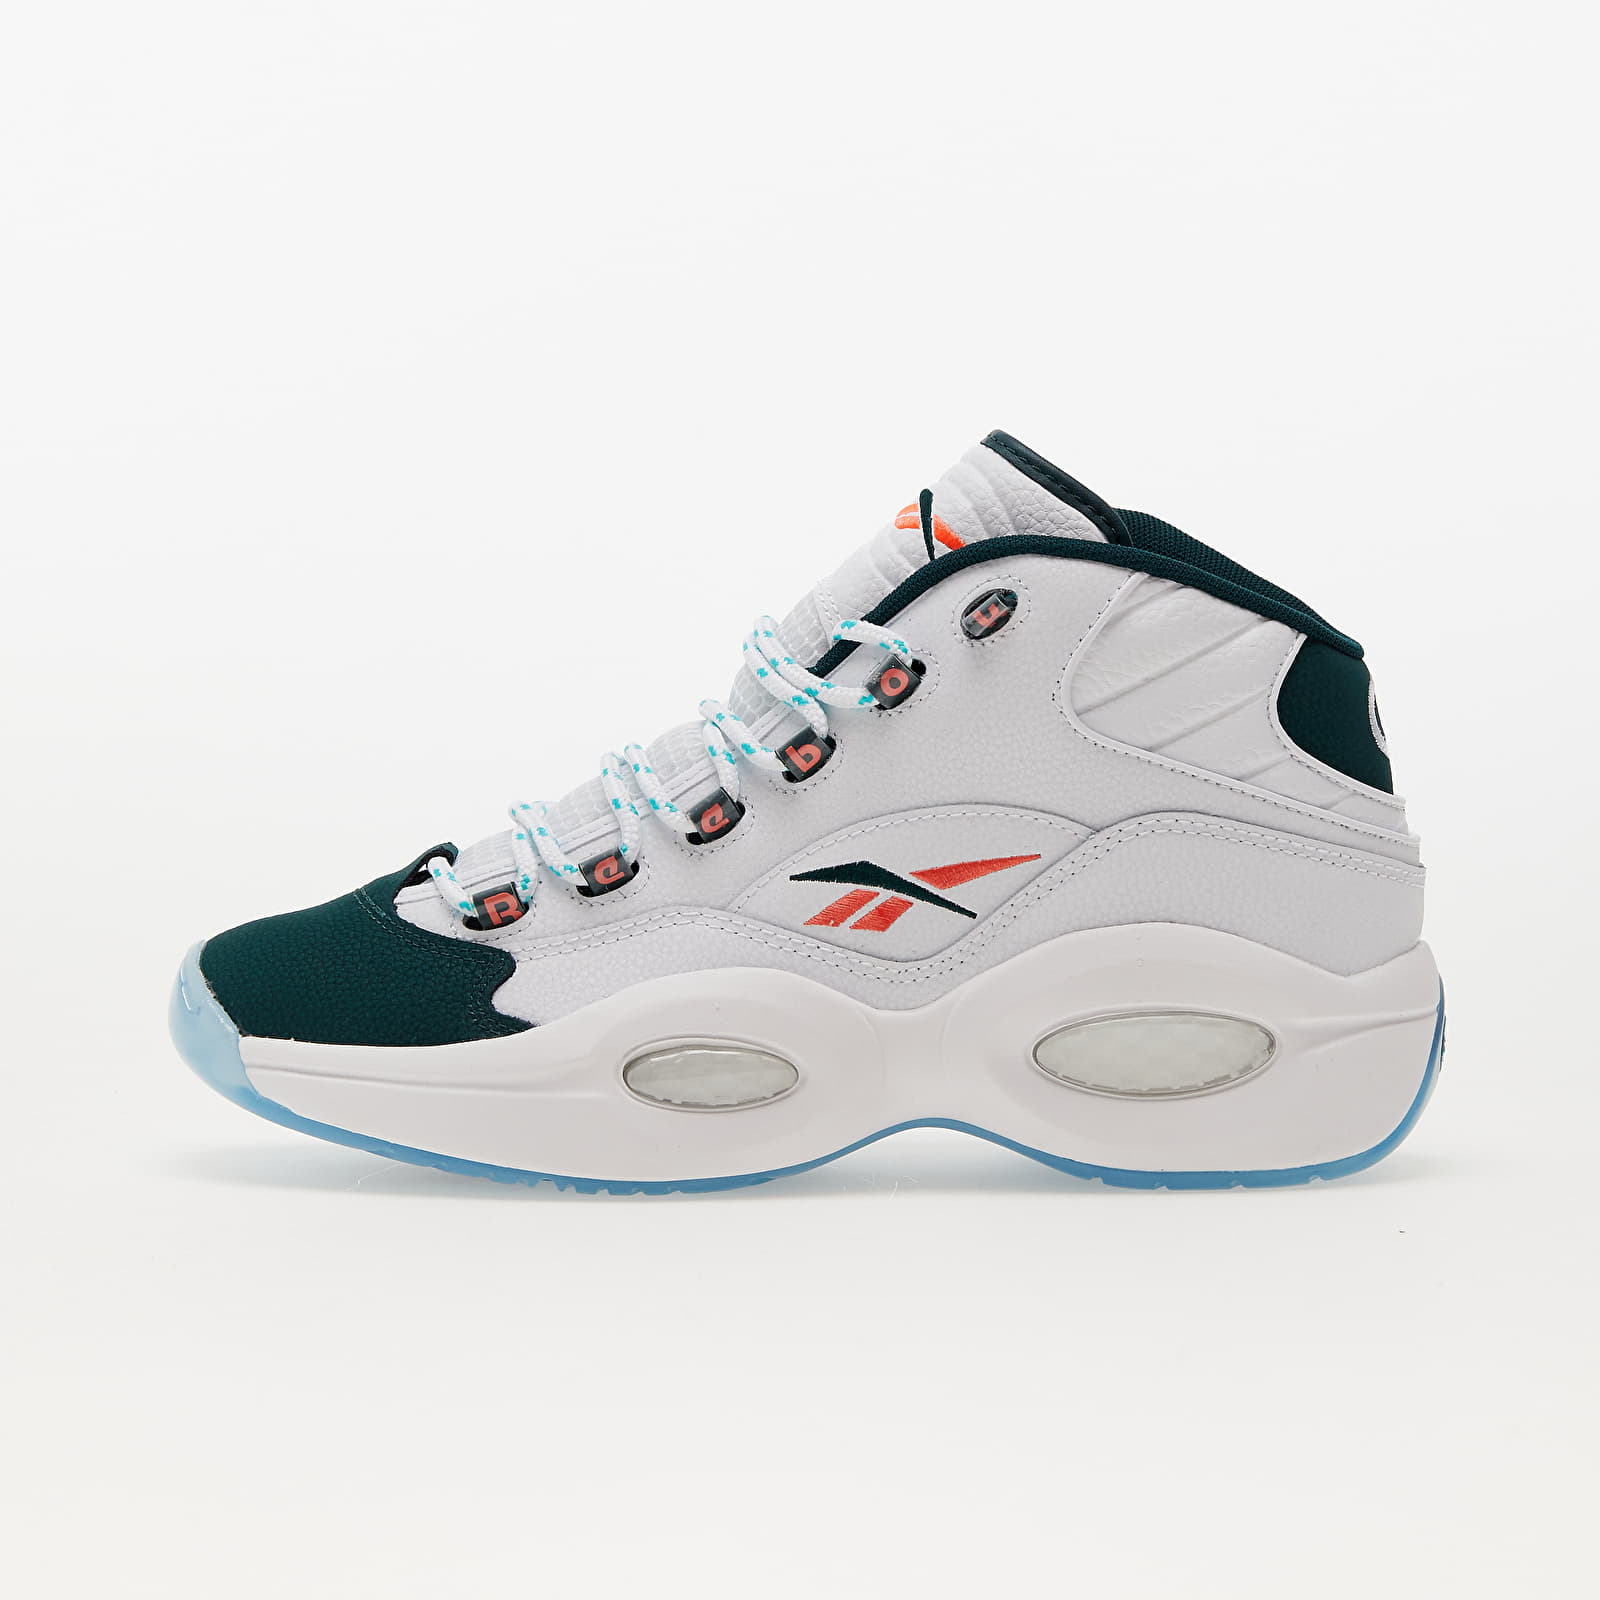 Buty męskie Reebok Question Mid Soft White/ Foreign Green/ Organic Flame